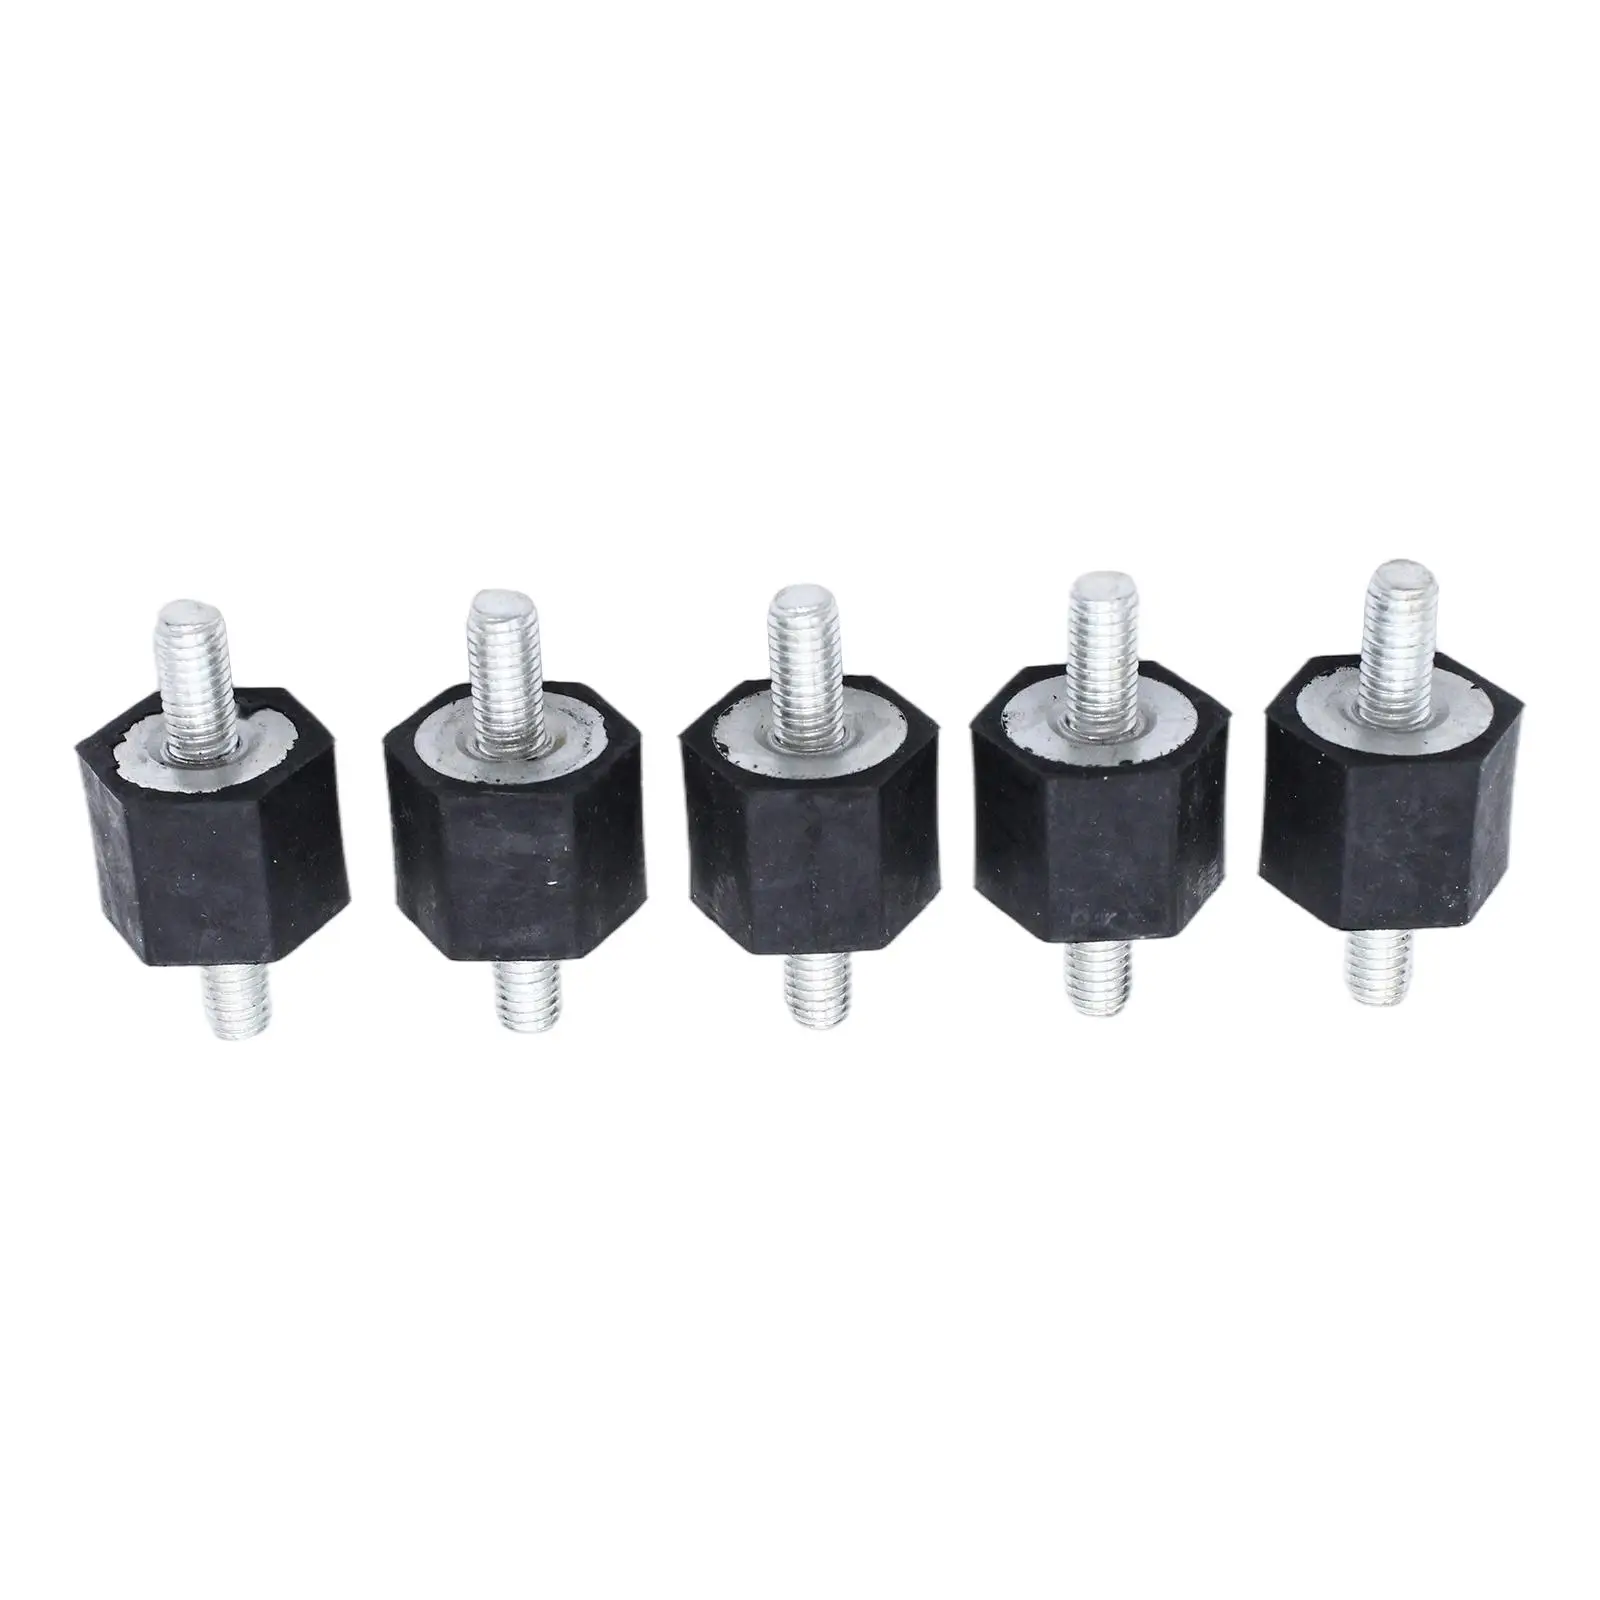 5 Pieces Fuel Pump Engine Cover Rubber Mounts Fit for Golf MK2 Oil Coolers